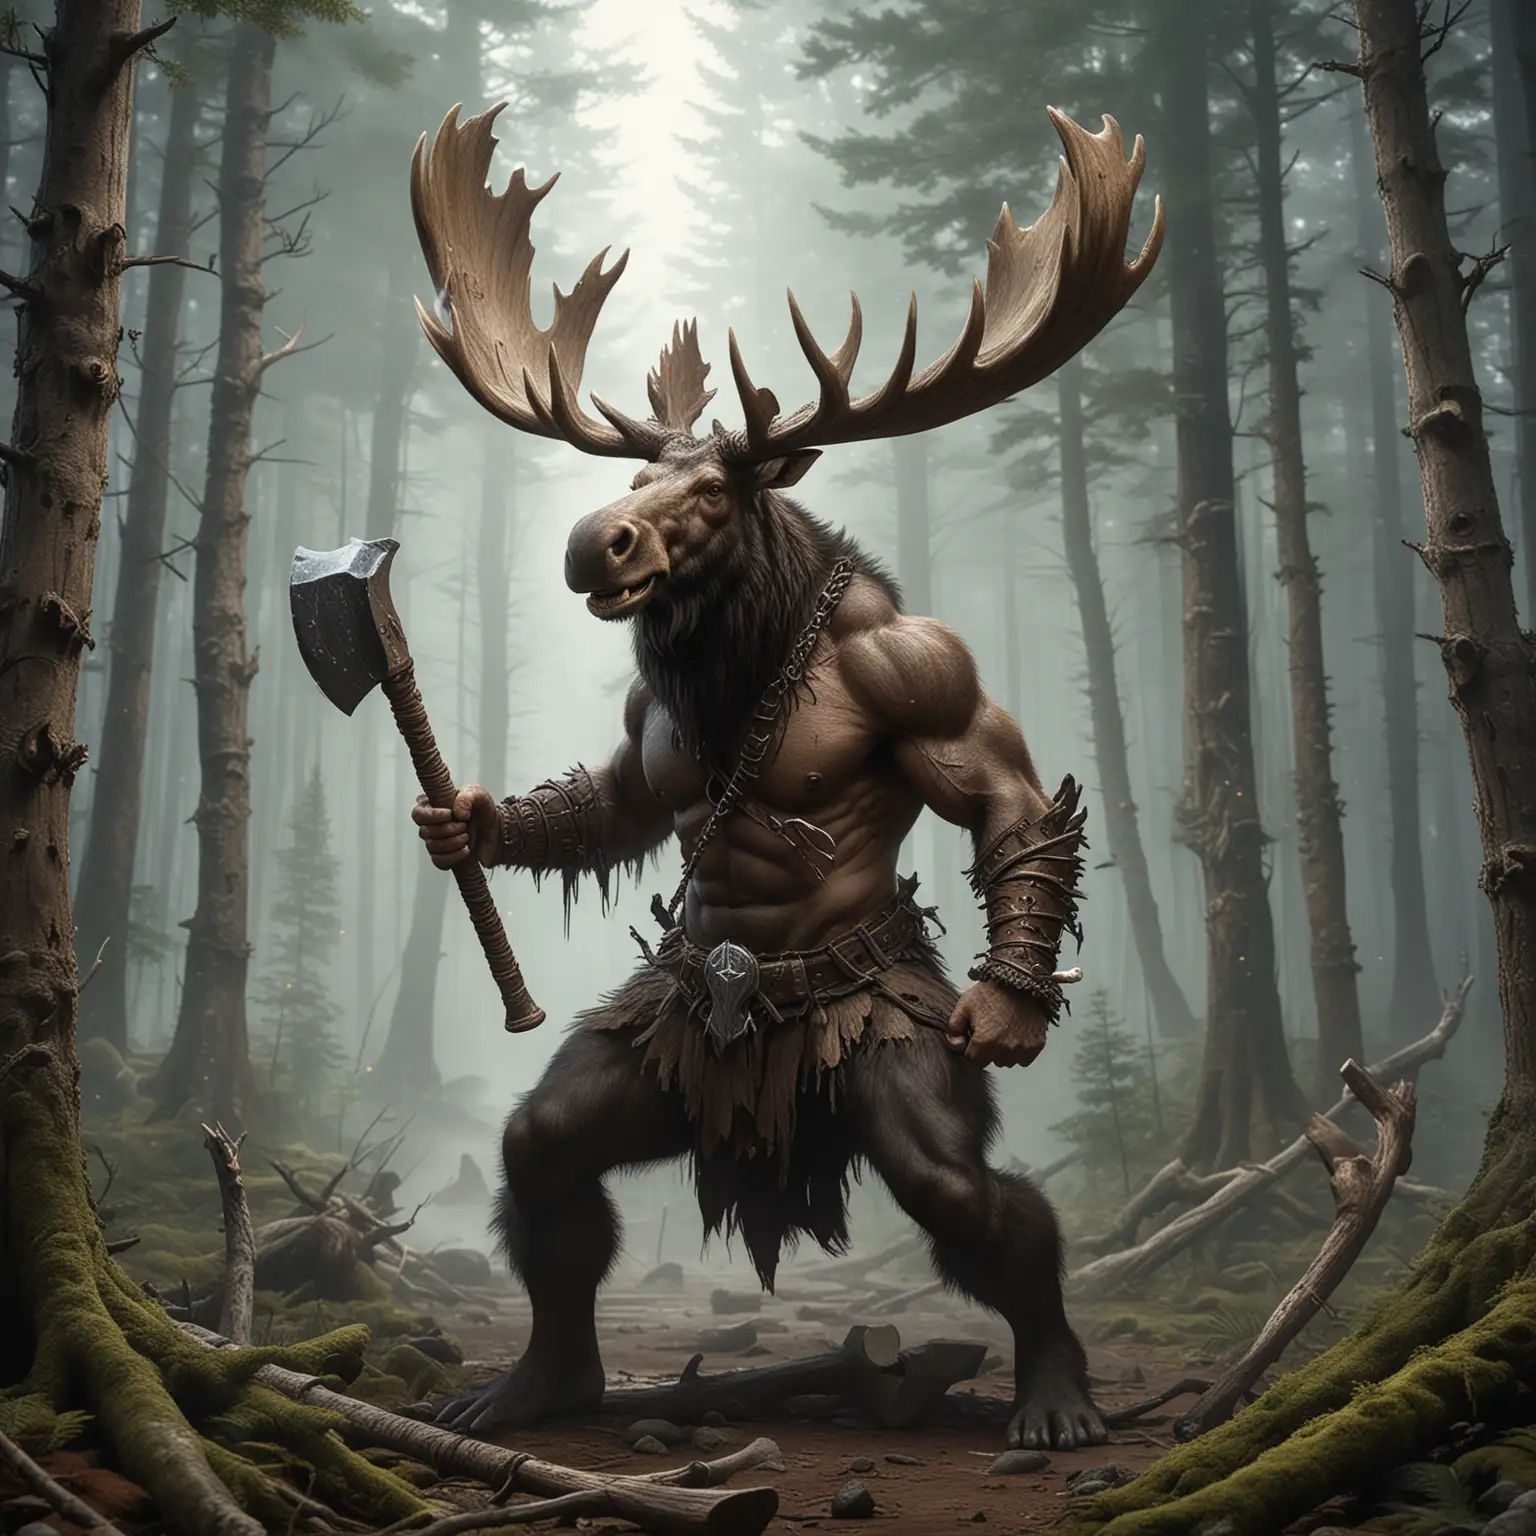 a barbarian moose with a human body swinging an axe on a fantasy forest